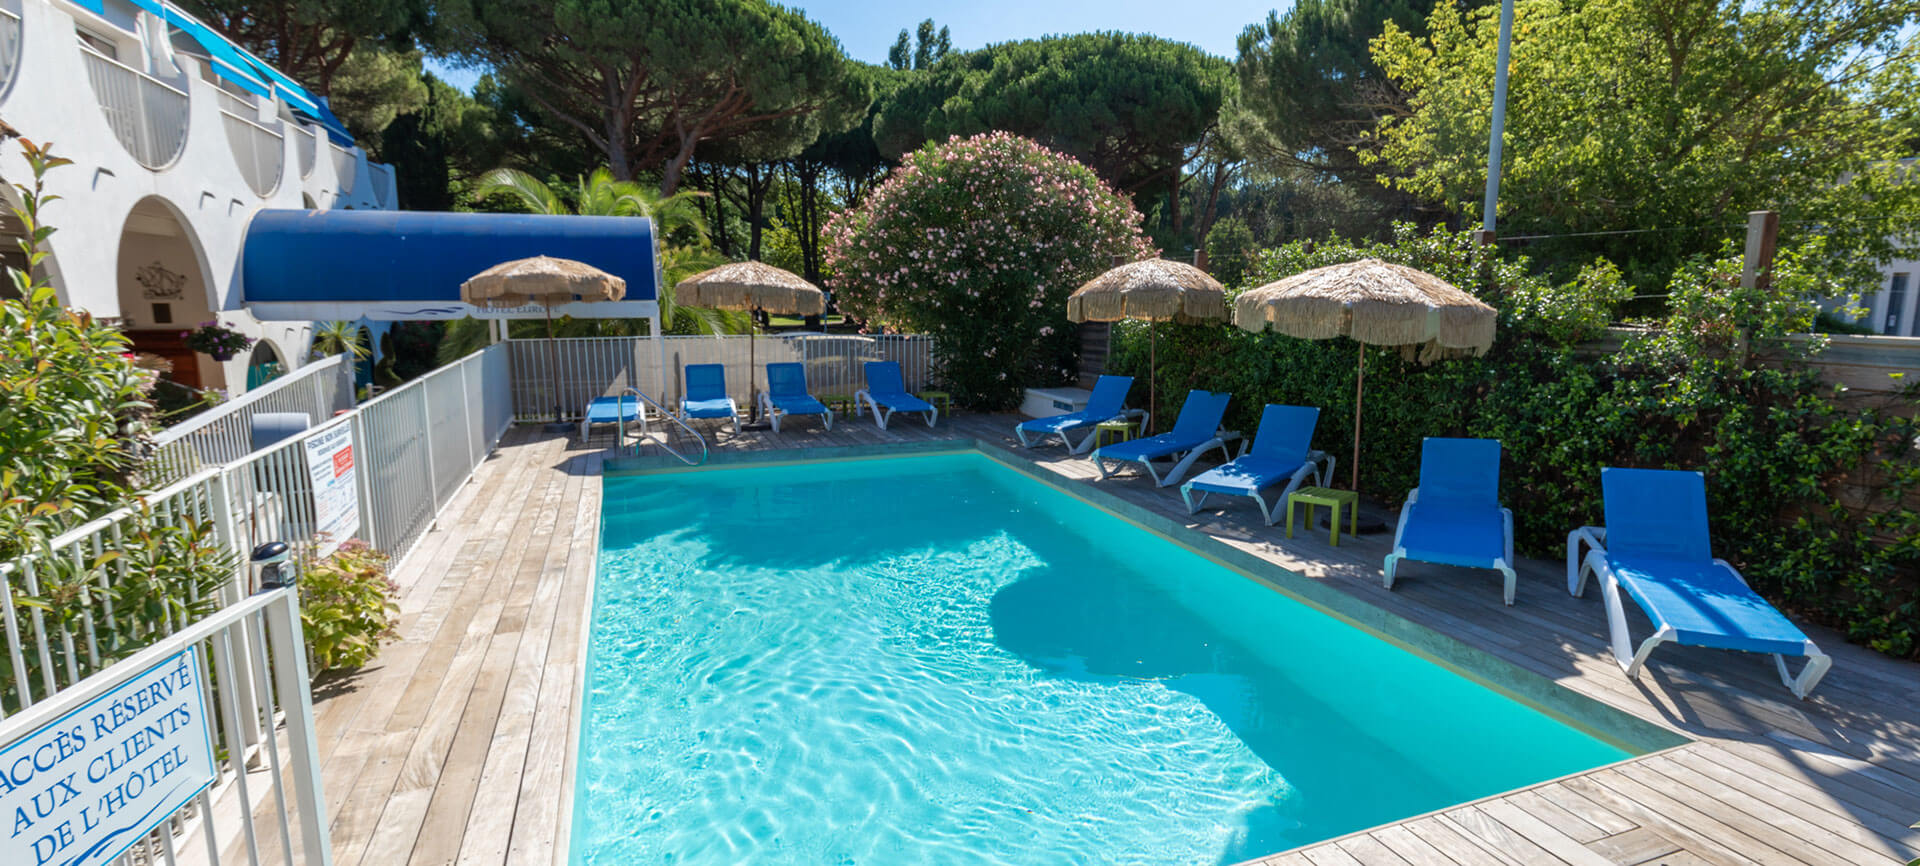 A large swimming pool with deckchairs for sunbathing at the Hotel Europe in the Hérault